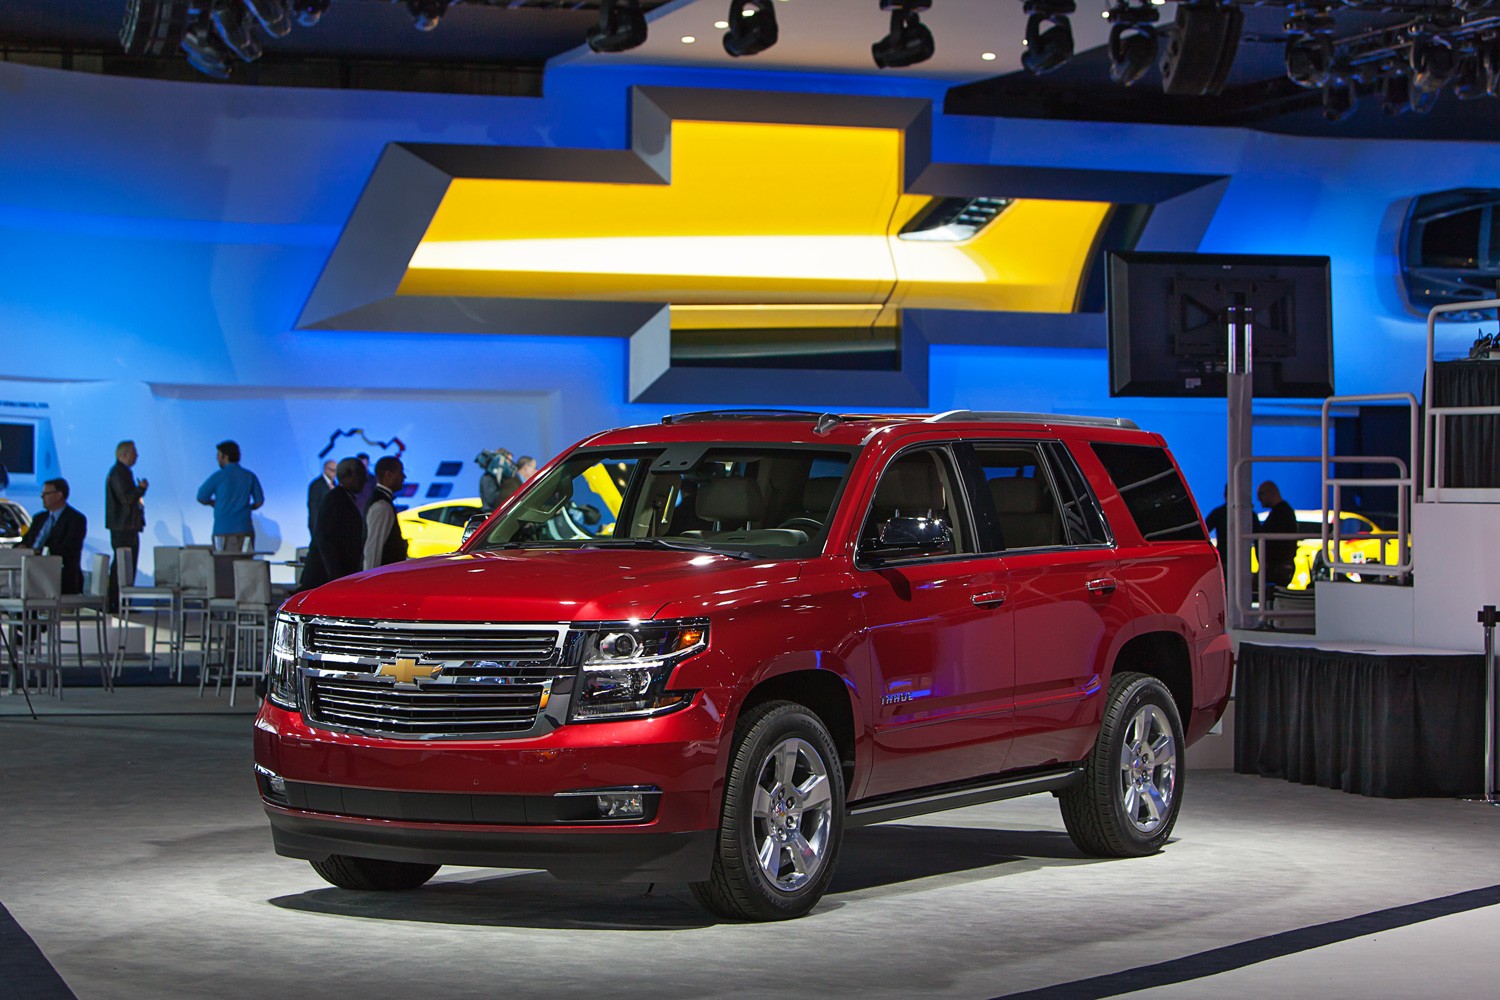 Chevy Tahoe on display at the auto show